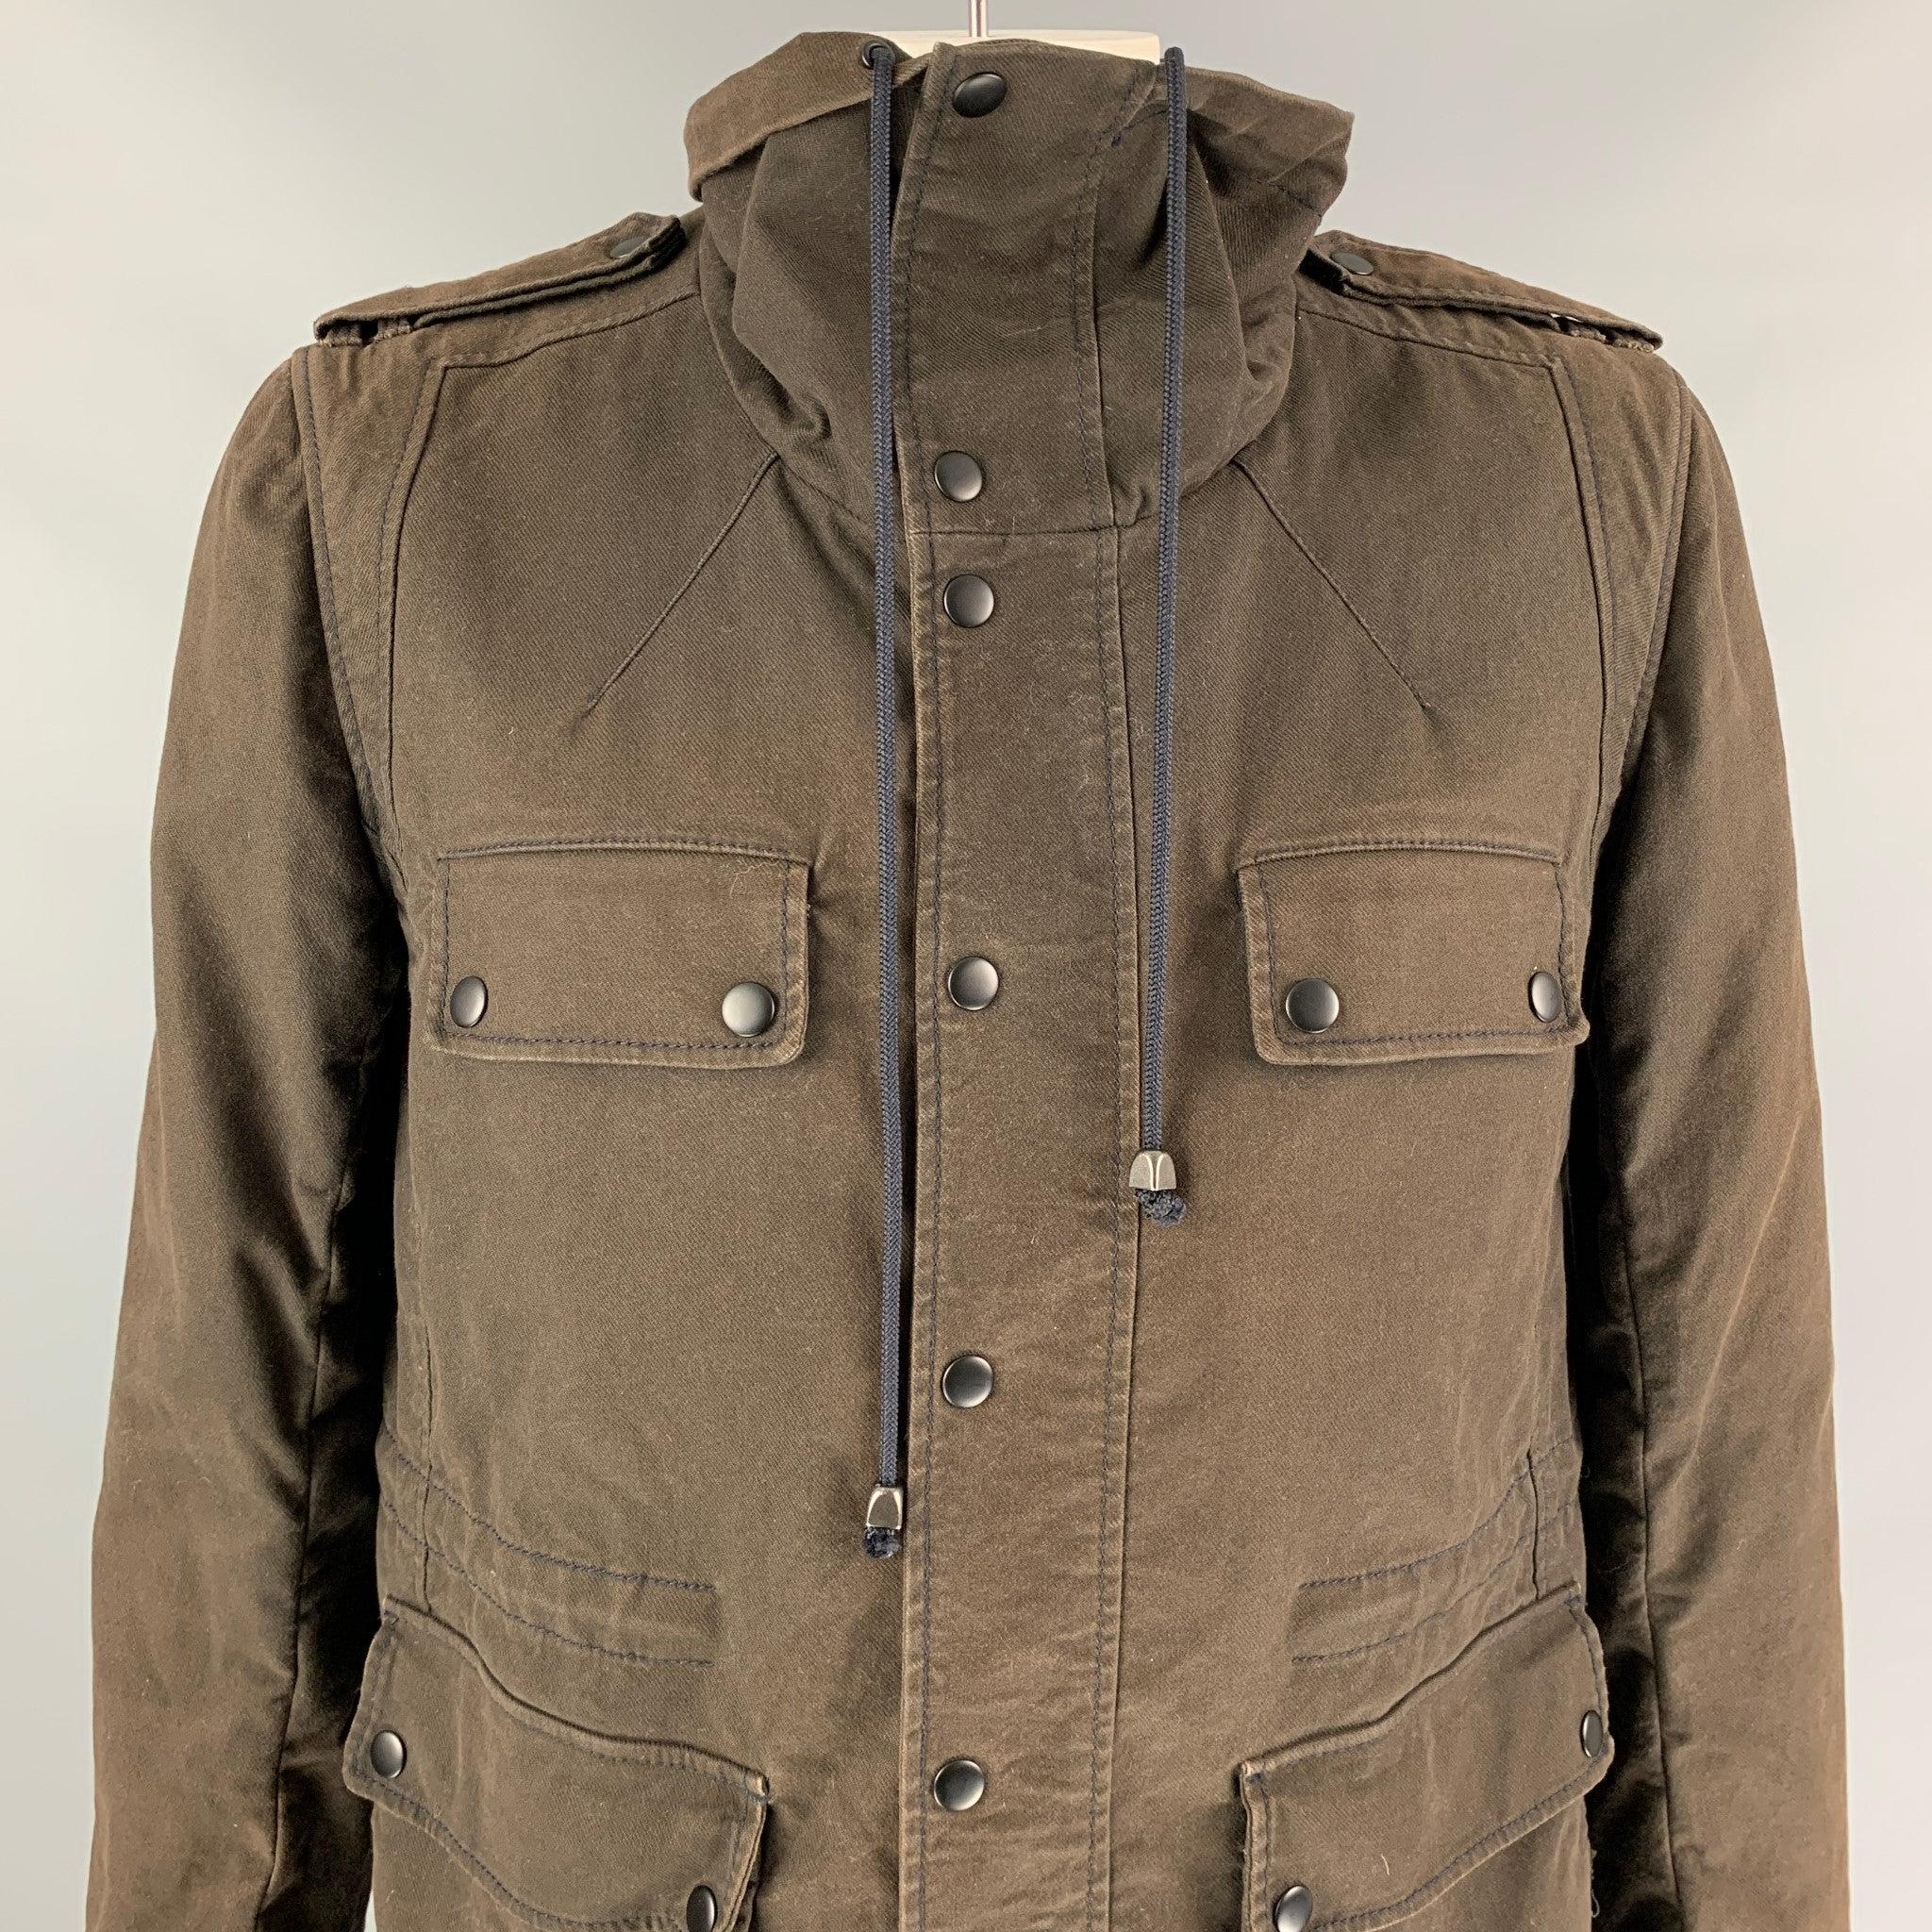 3.1 PHILLIP LIM coat comes in a brown cotton with a full liner featuring a high collar, utility style, front pockets, drawstring, epaulettes, and a snap button closure.
Very Good
Pre-Owned Condition. 

Marked:  L 

Measurements: 
 
Shoulder: 18.5